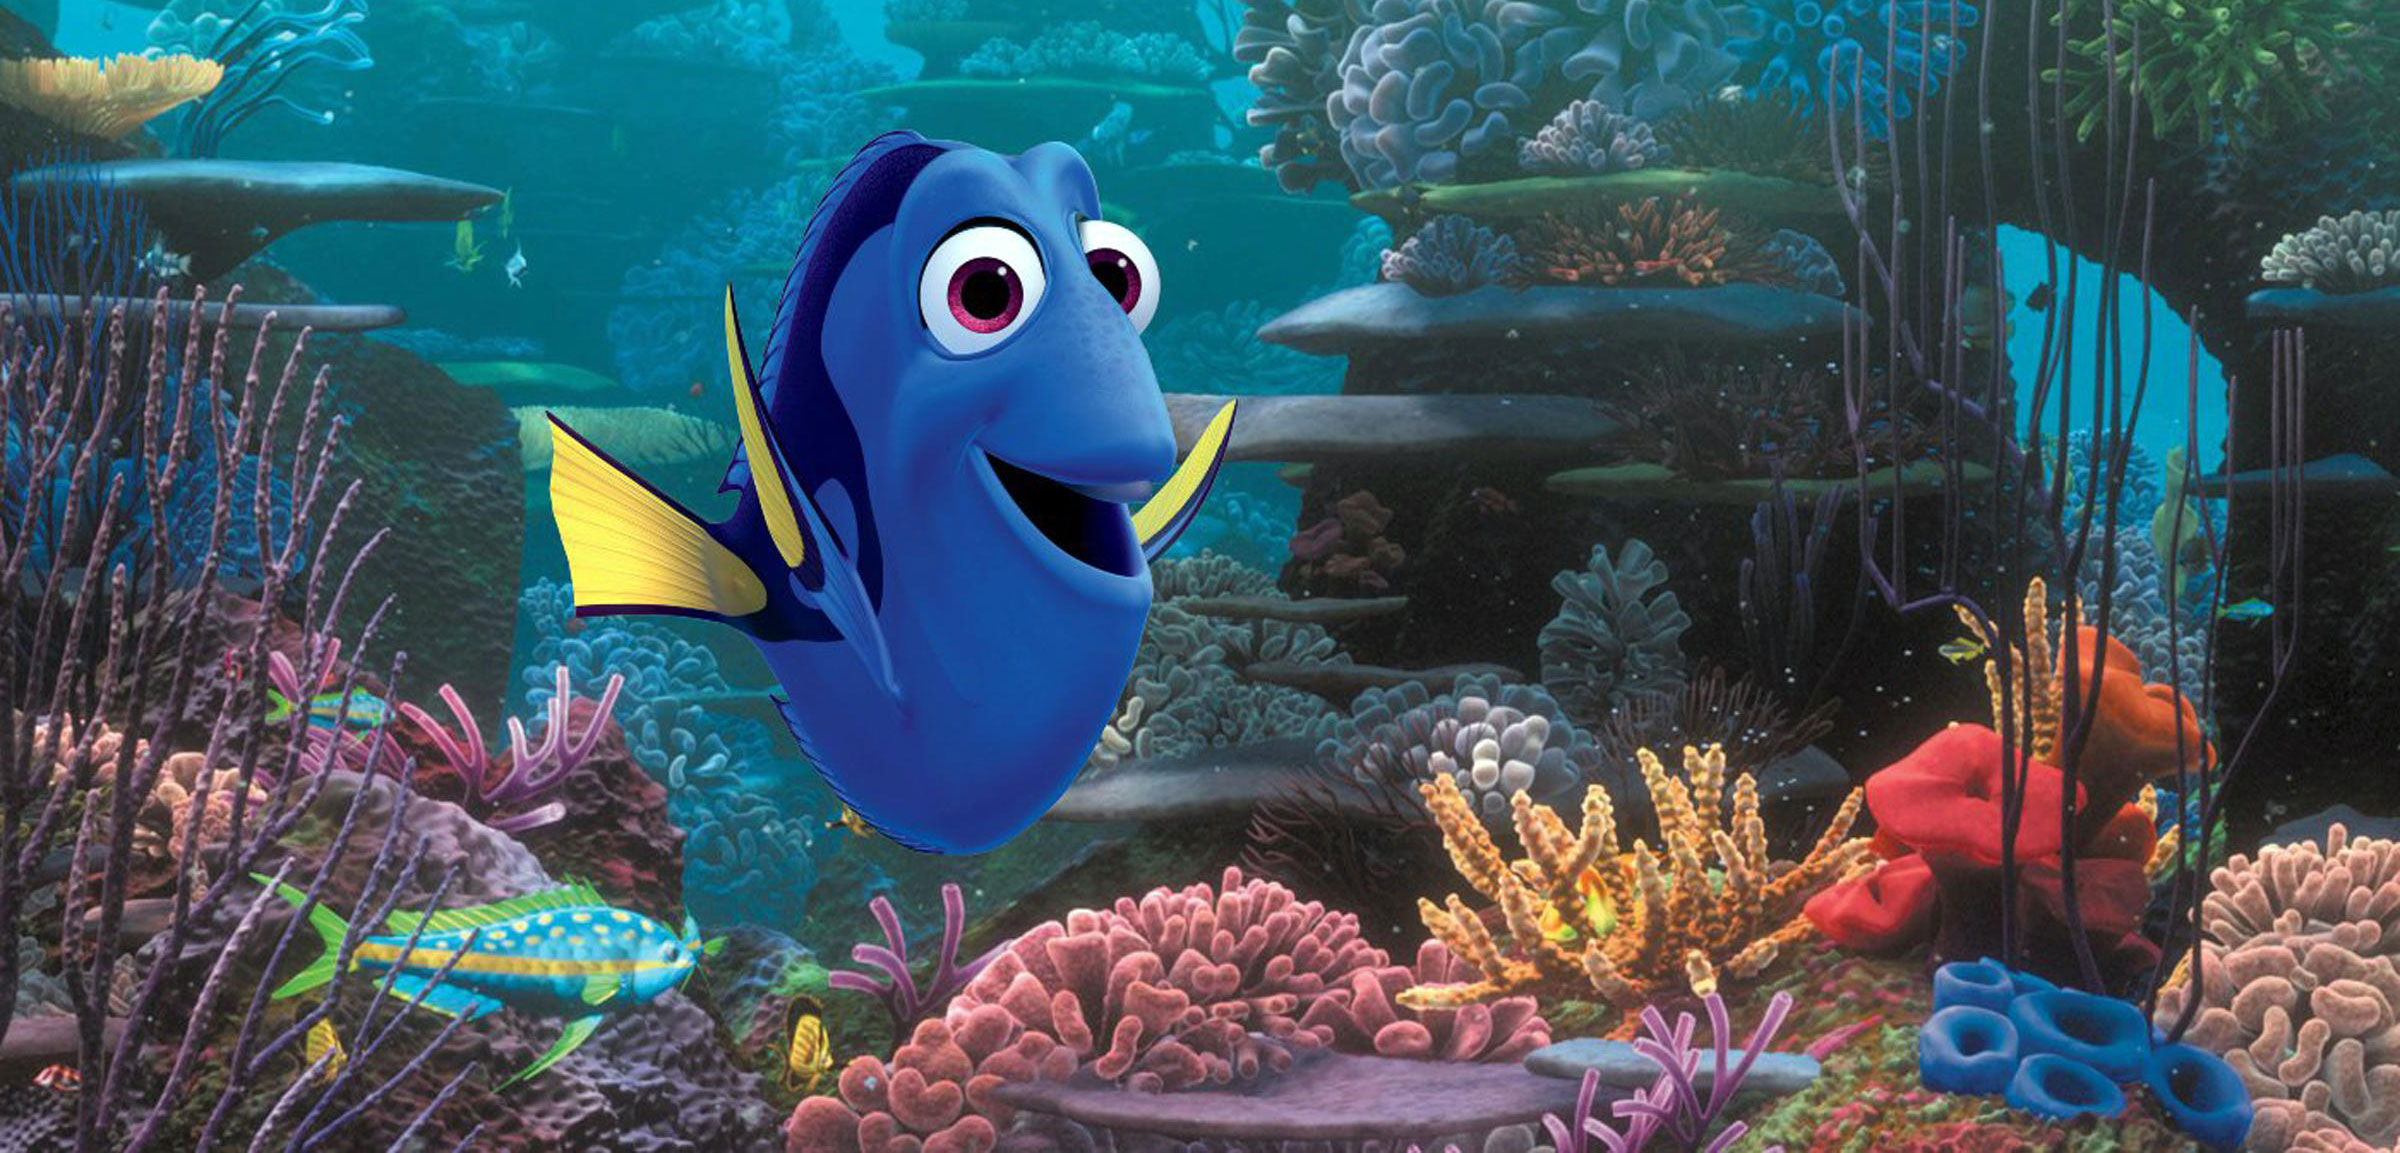 still from the movie Finding Dory